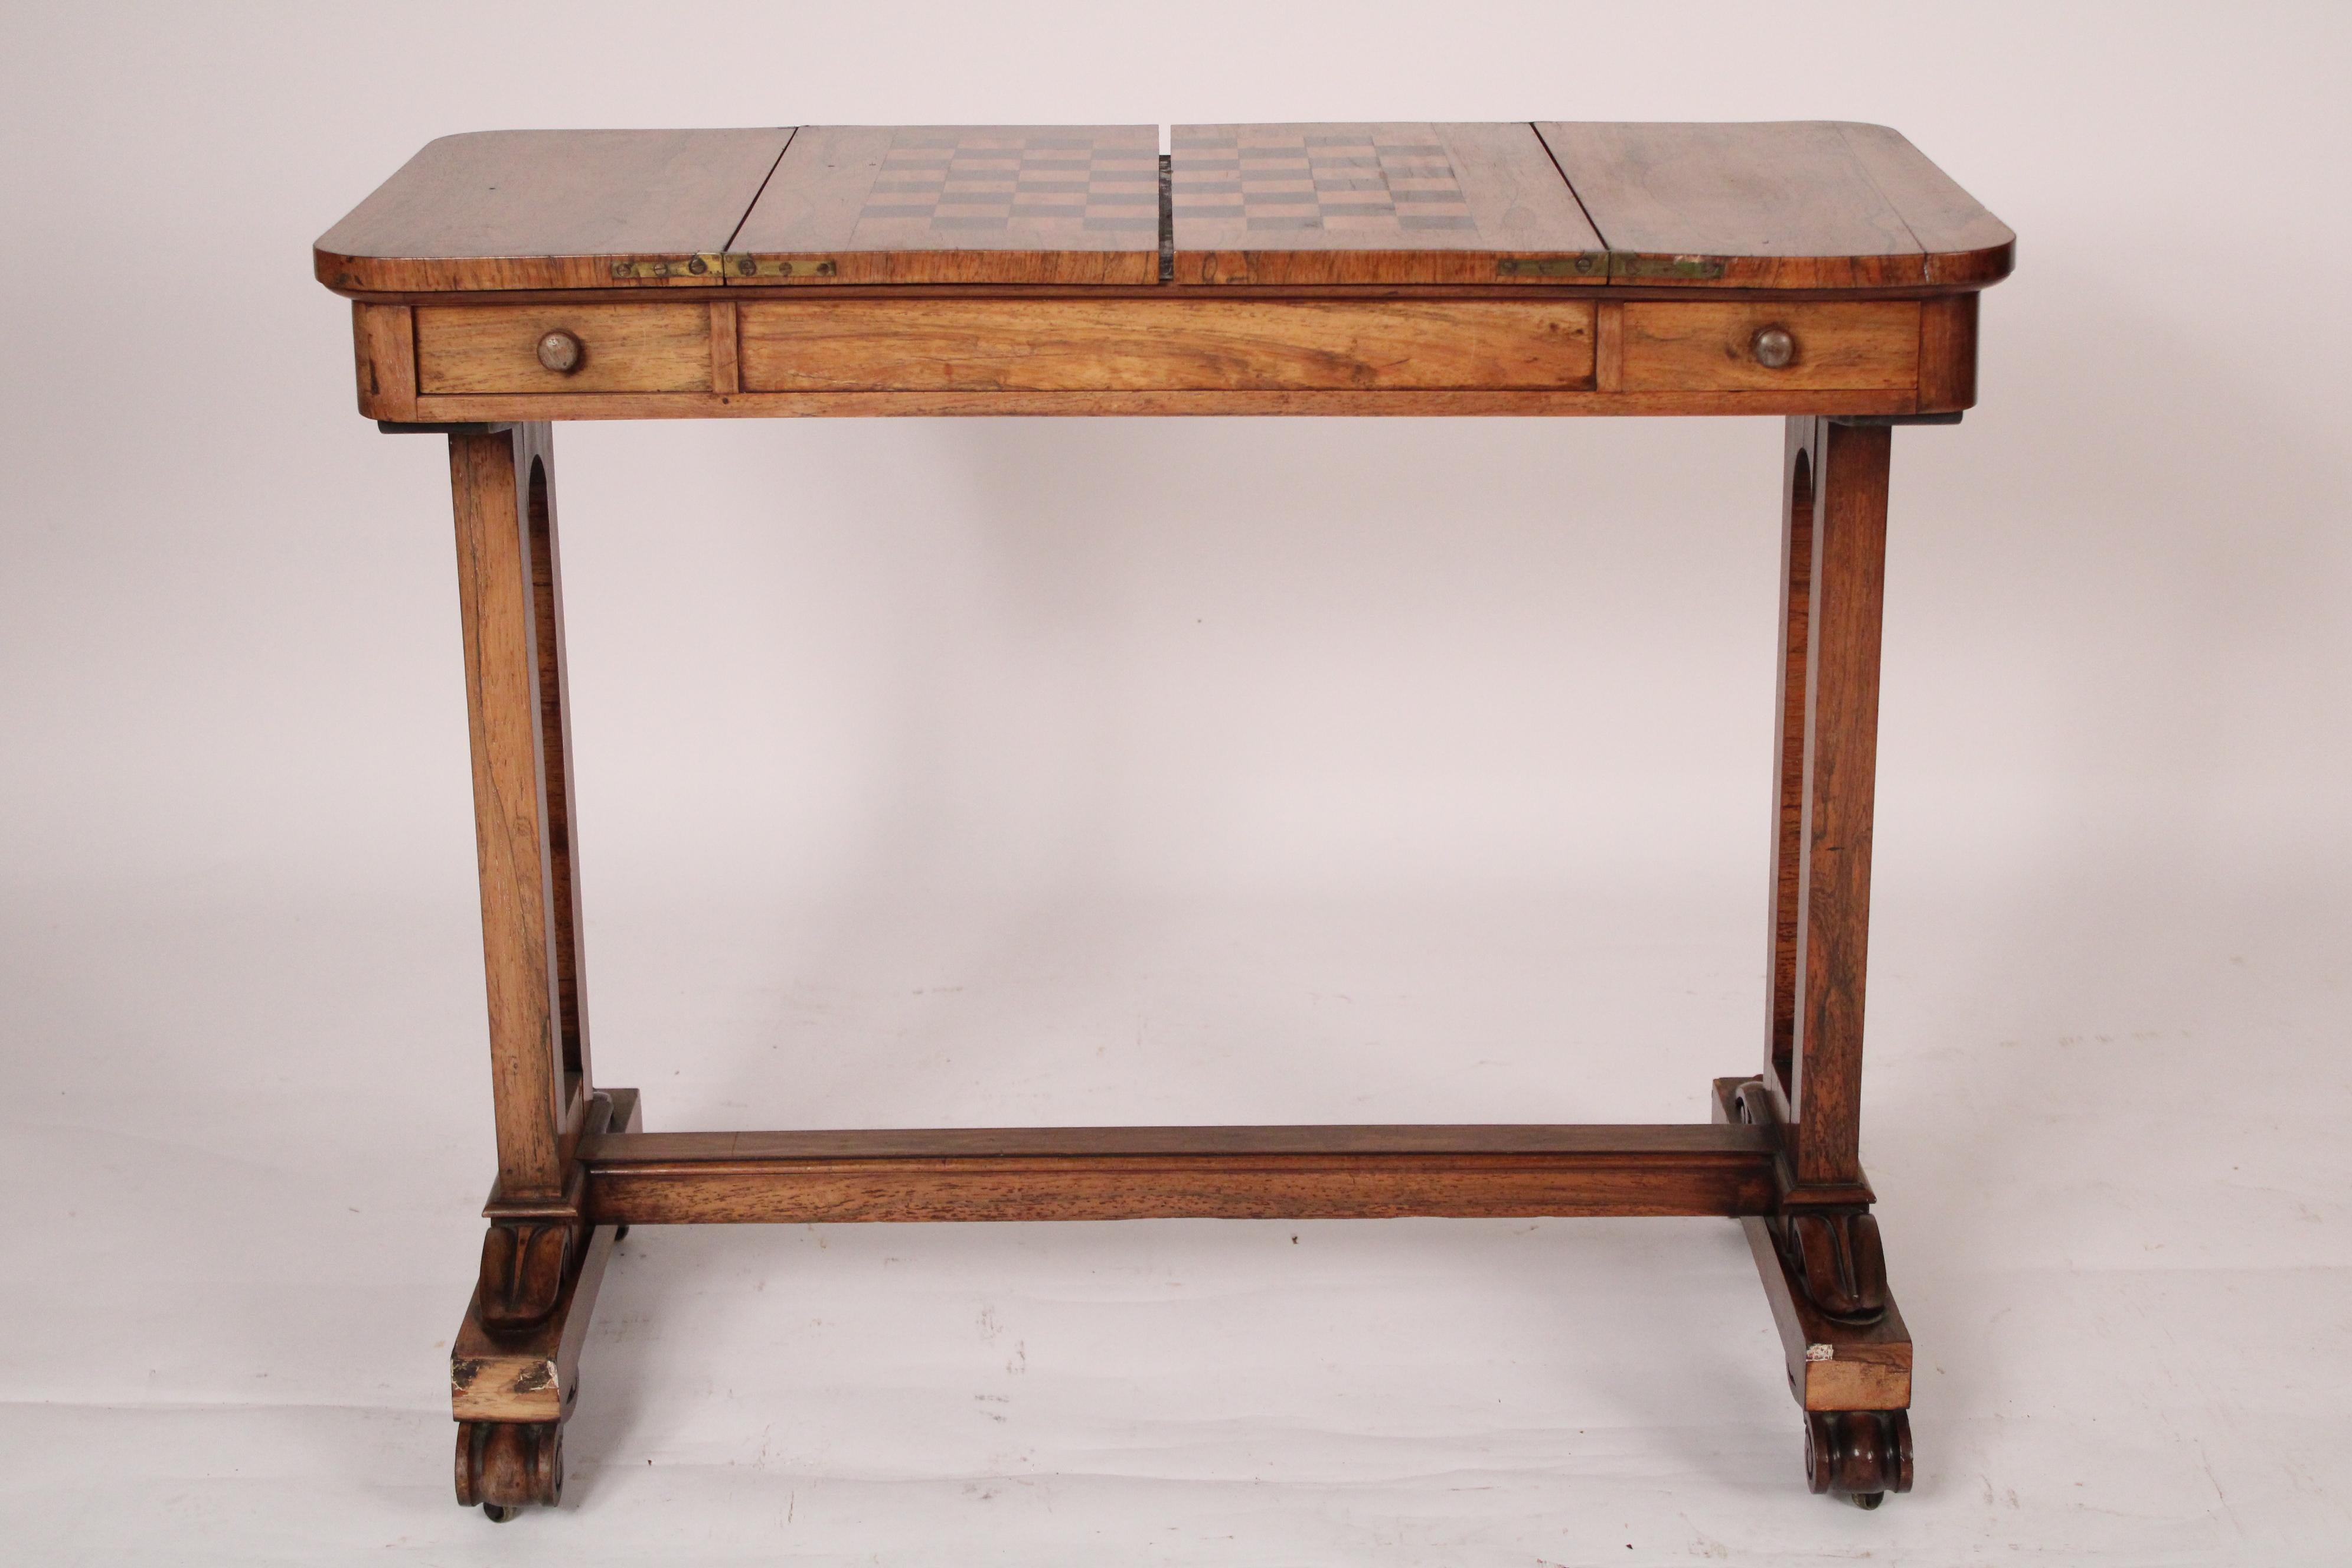 William IV rosewood writing / games table, circa 1830. With a rectangular rosewood top with rounded corners, a beech wood and rosewood inlaid checker board that lifts up to a leather backgammon board, frieze 
drawers on left and right sides,